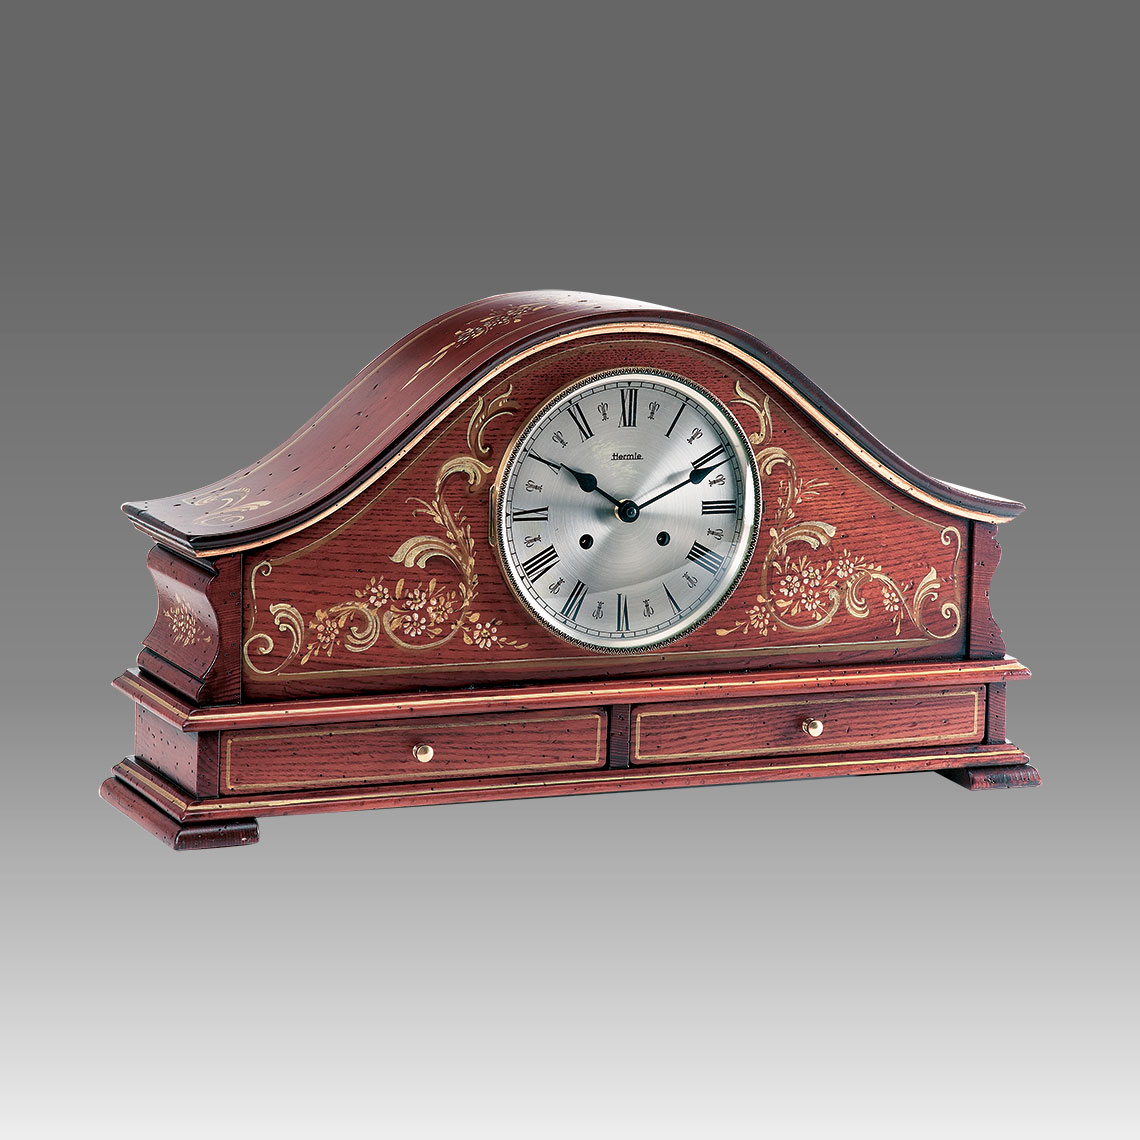 Mante Clock, Table Clock, Cimn Clock, Art.335/2 Walnut with hand-decoration and drawers - Bim Bam melody on Bells, Silver round dial